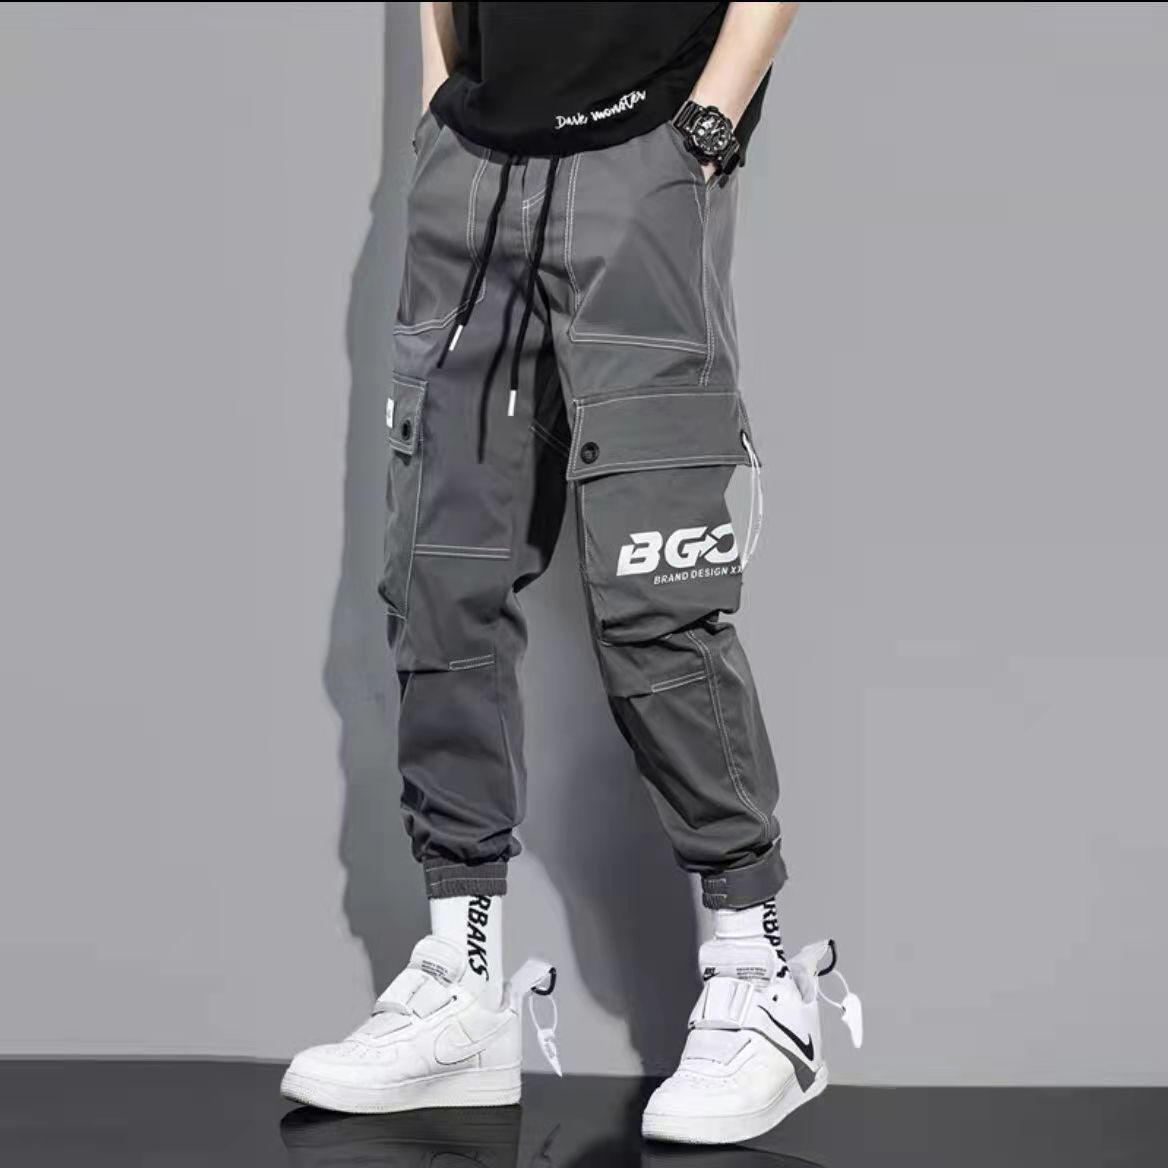 Pants Men's Spring and Autumn Trendy Brand Loose All-match Cotton Workwear Casual Trousers Student Sports Pants